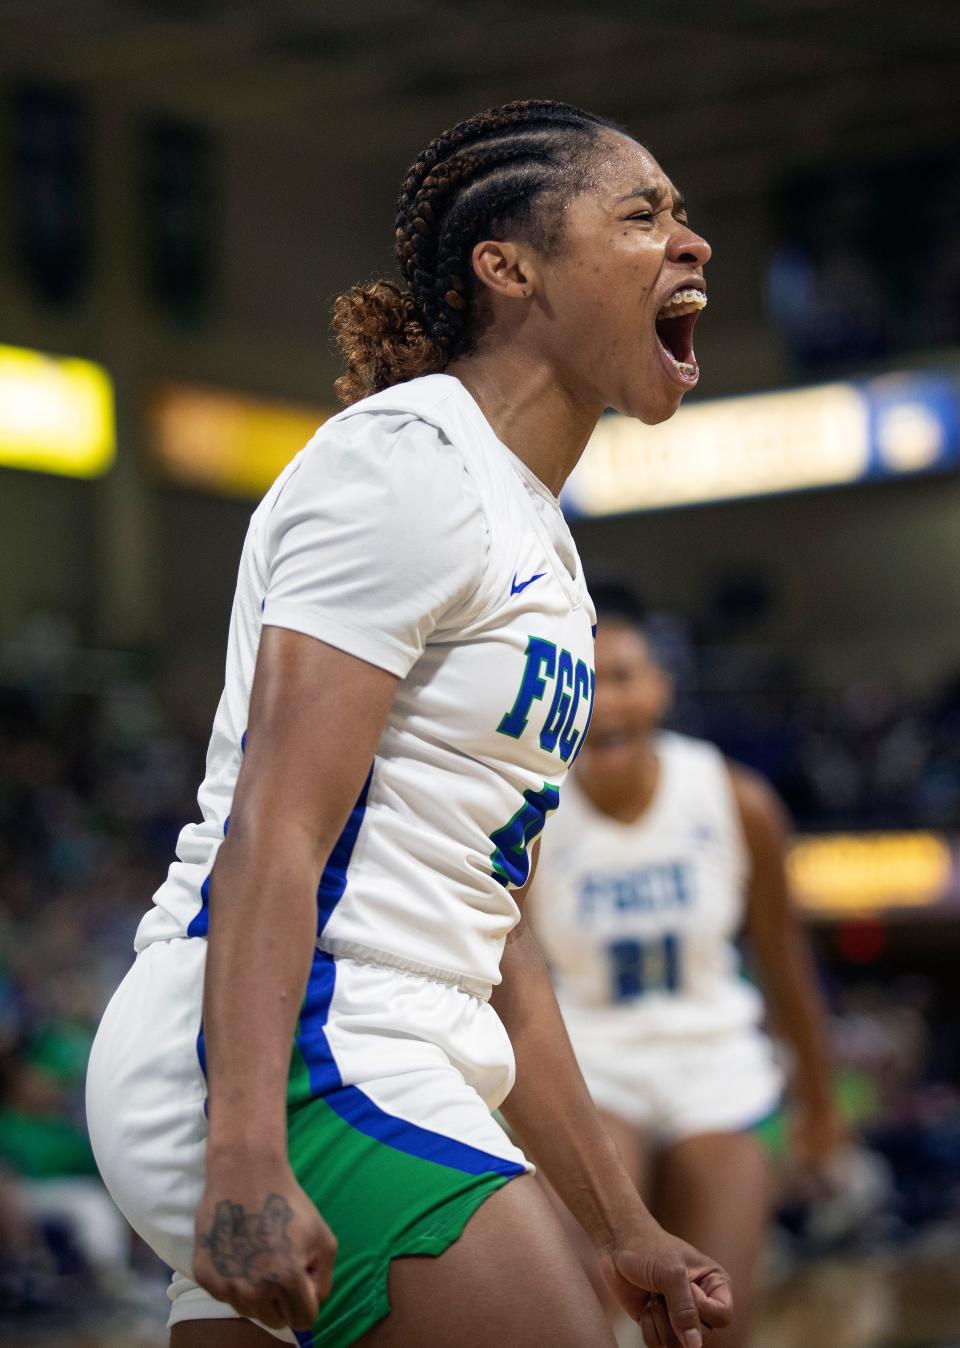 Tishara Morehouse of FGCU celebrates making a shot and getting fouled against Liberty in the ASUN Women's Basketball Championship on Saturday, March 11, 2023, at Florida Gulf Coast University.